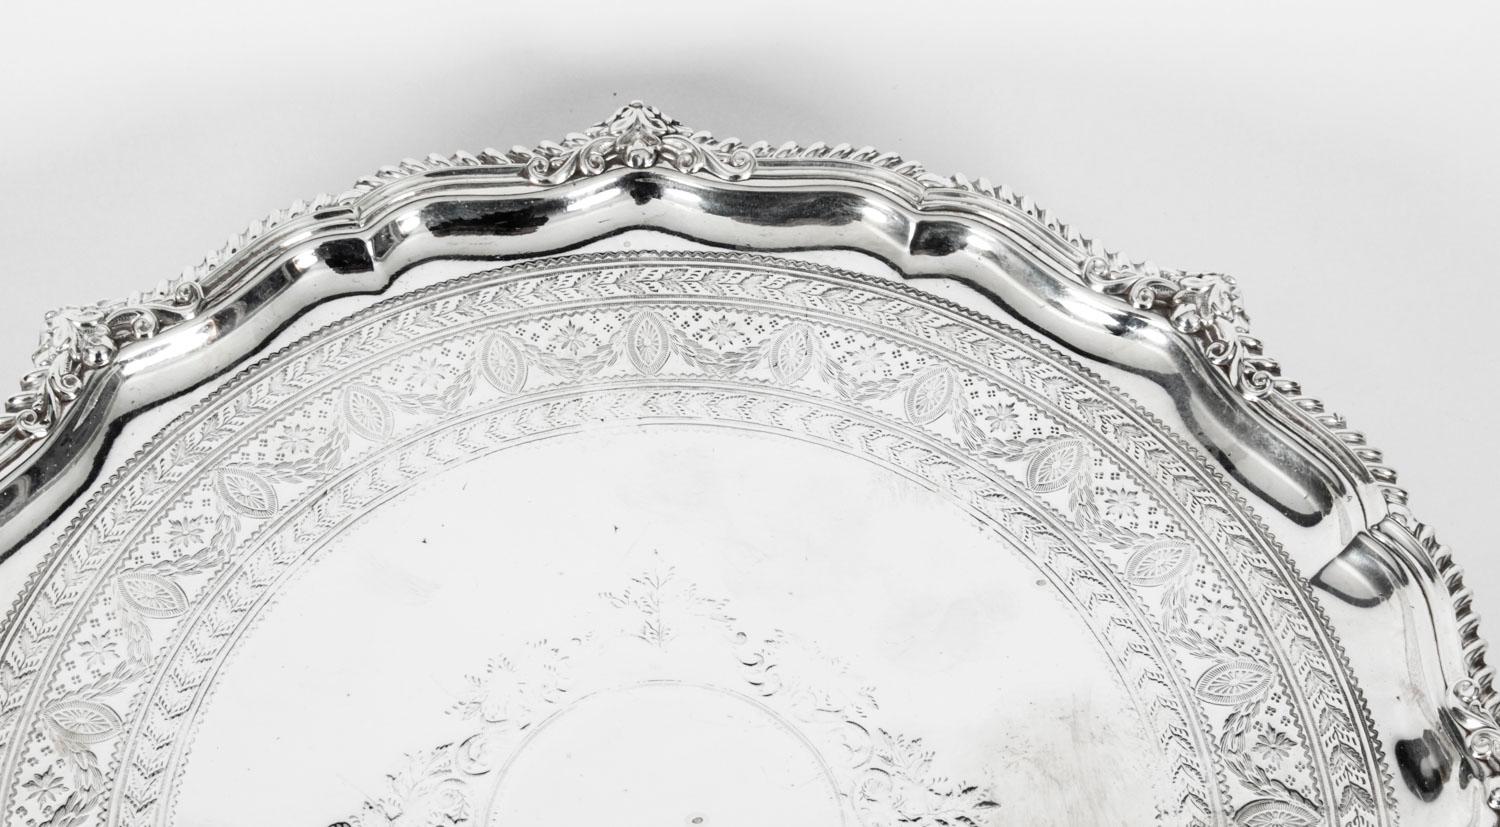 This is a wonderful antique silver plated Victorian salver bearing the makers mark of the renowned silversmith of Sheffield England, James Dixon, the inventory number 4523 and late 19th Century in date.

It has beautiful embossed and engraved